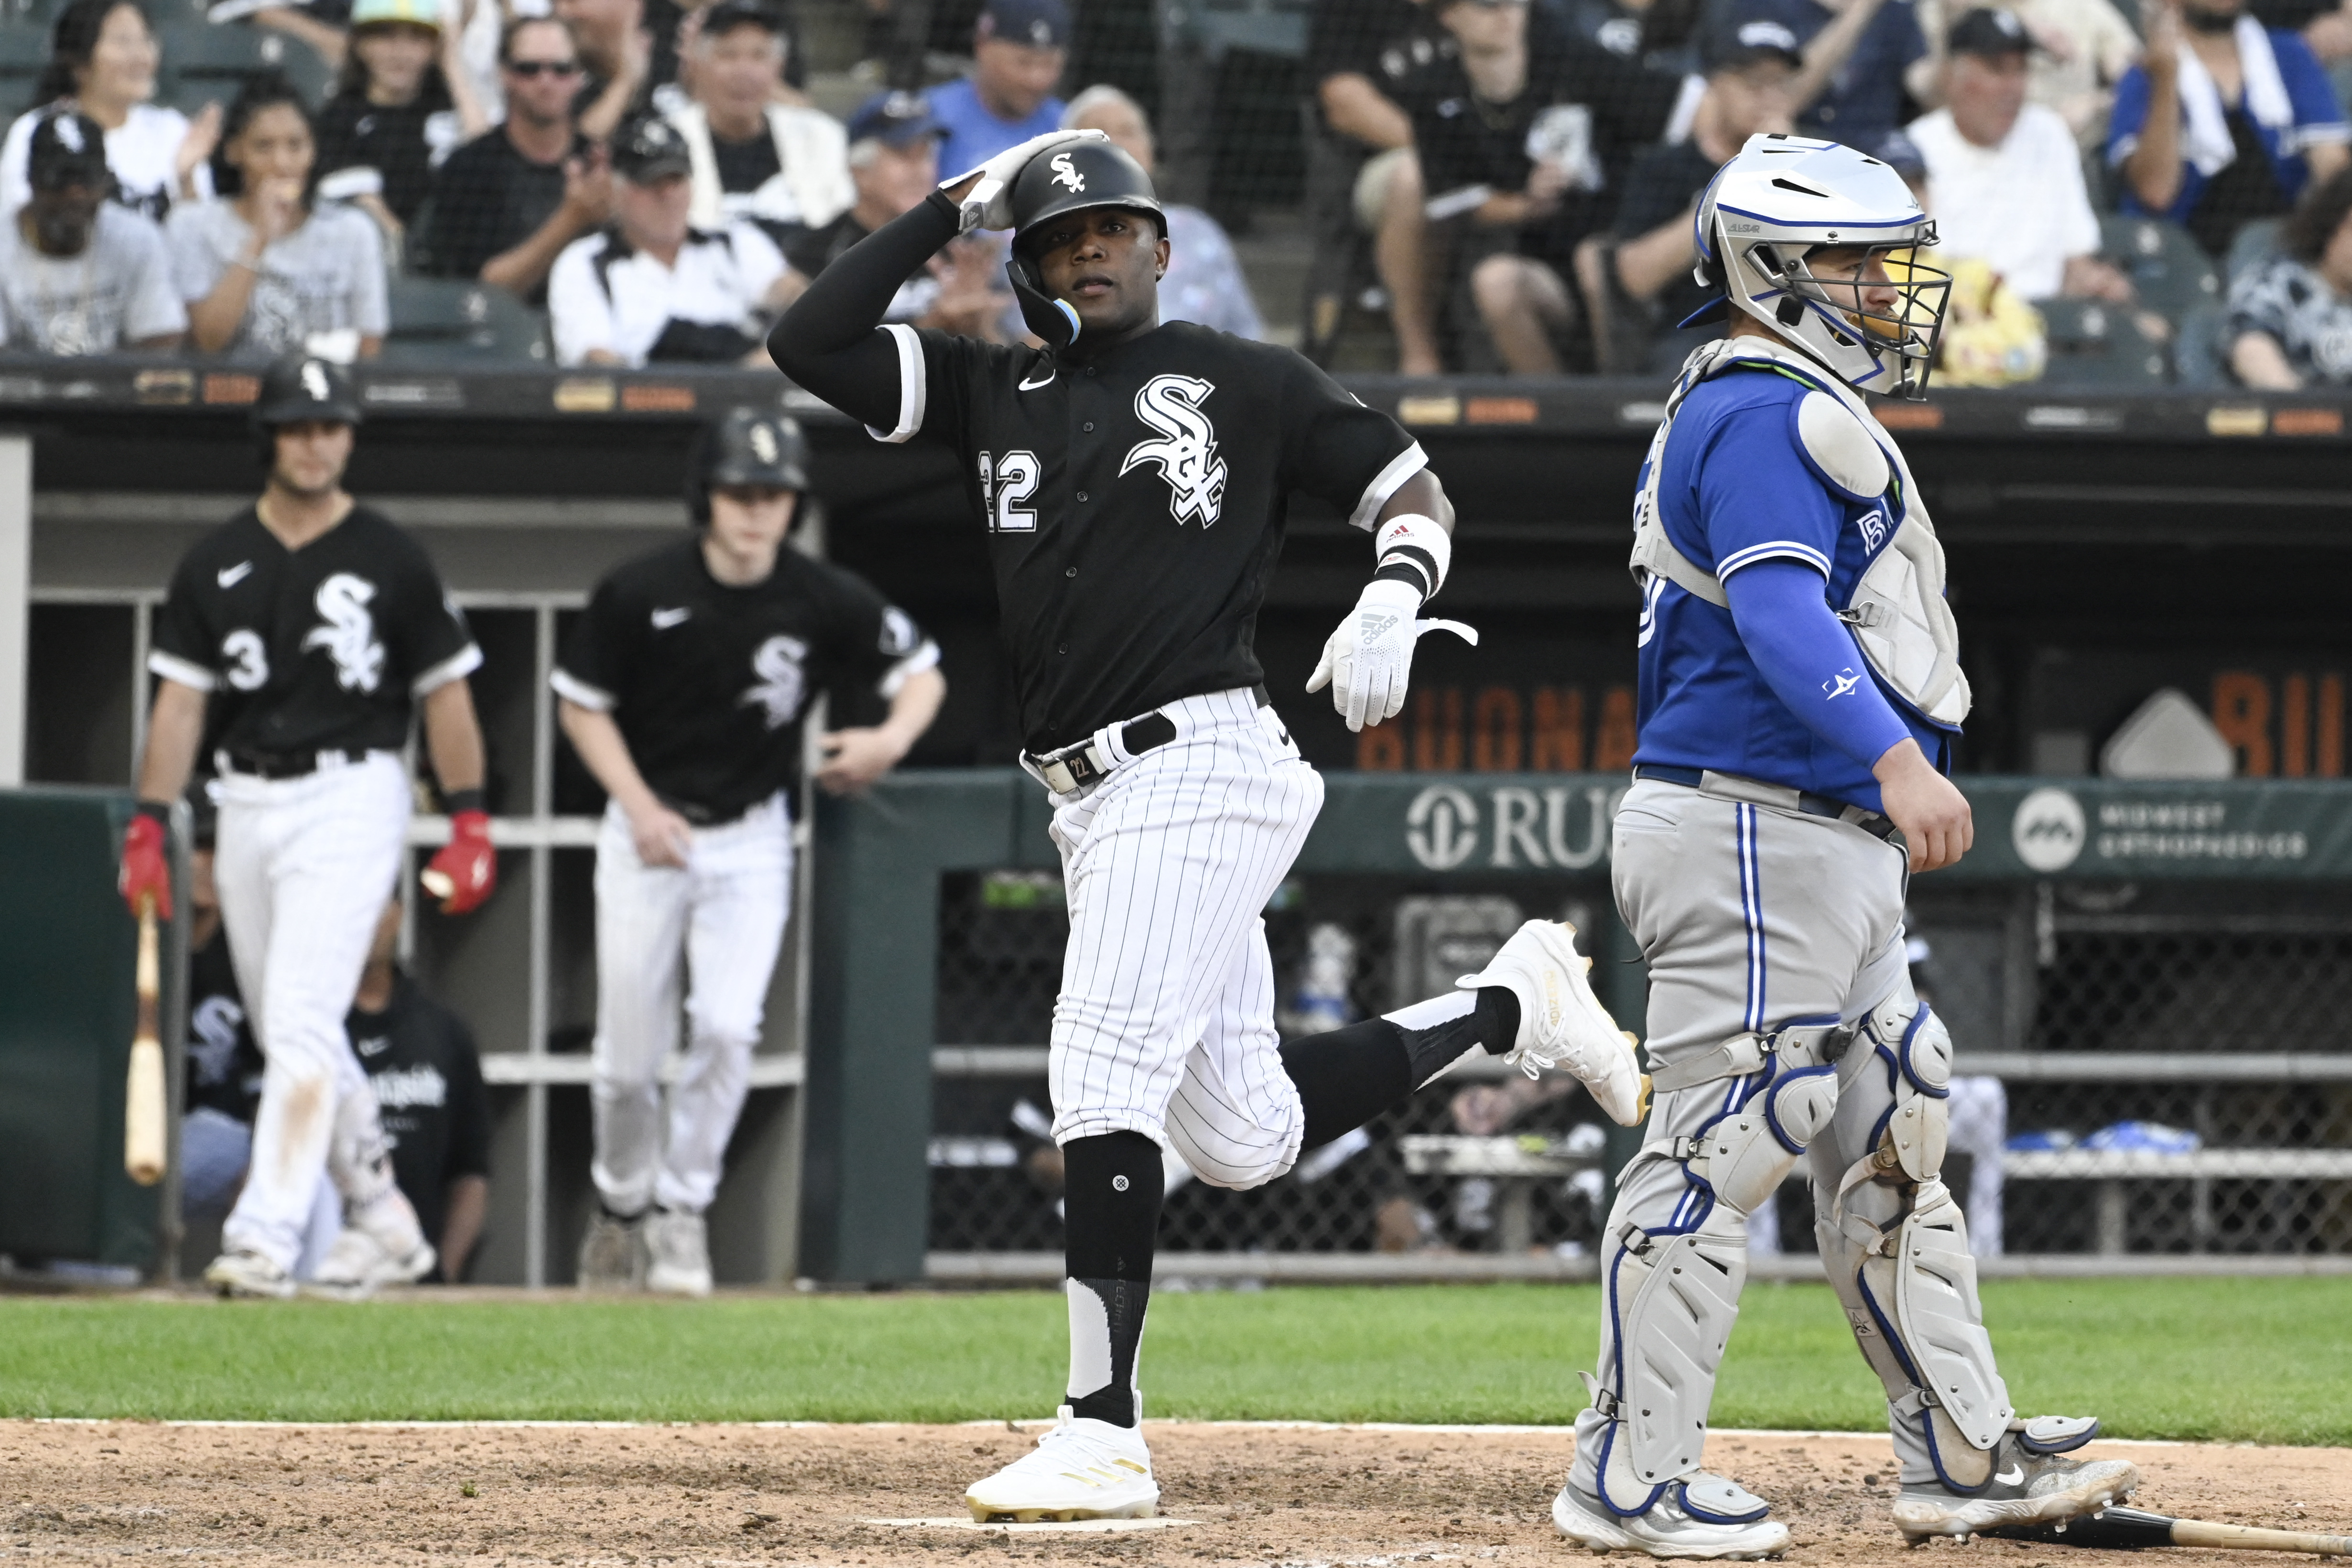 Toronto Blue Jays 6, Chicago White Sox 2 (11 innings): It was fun